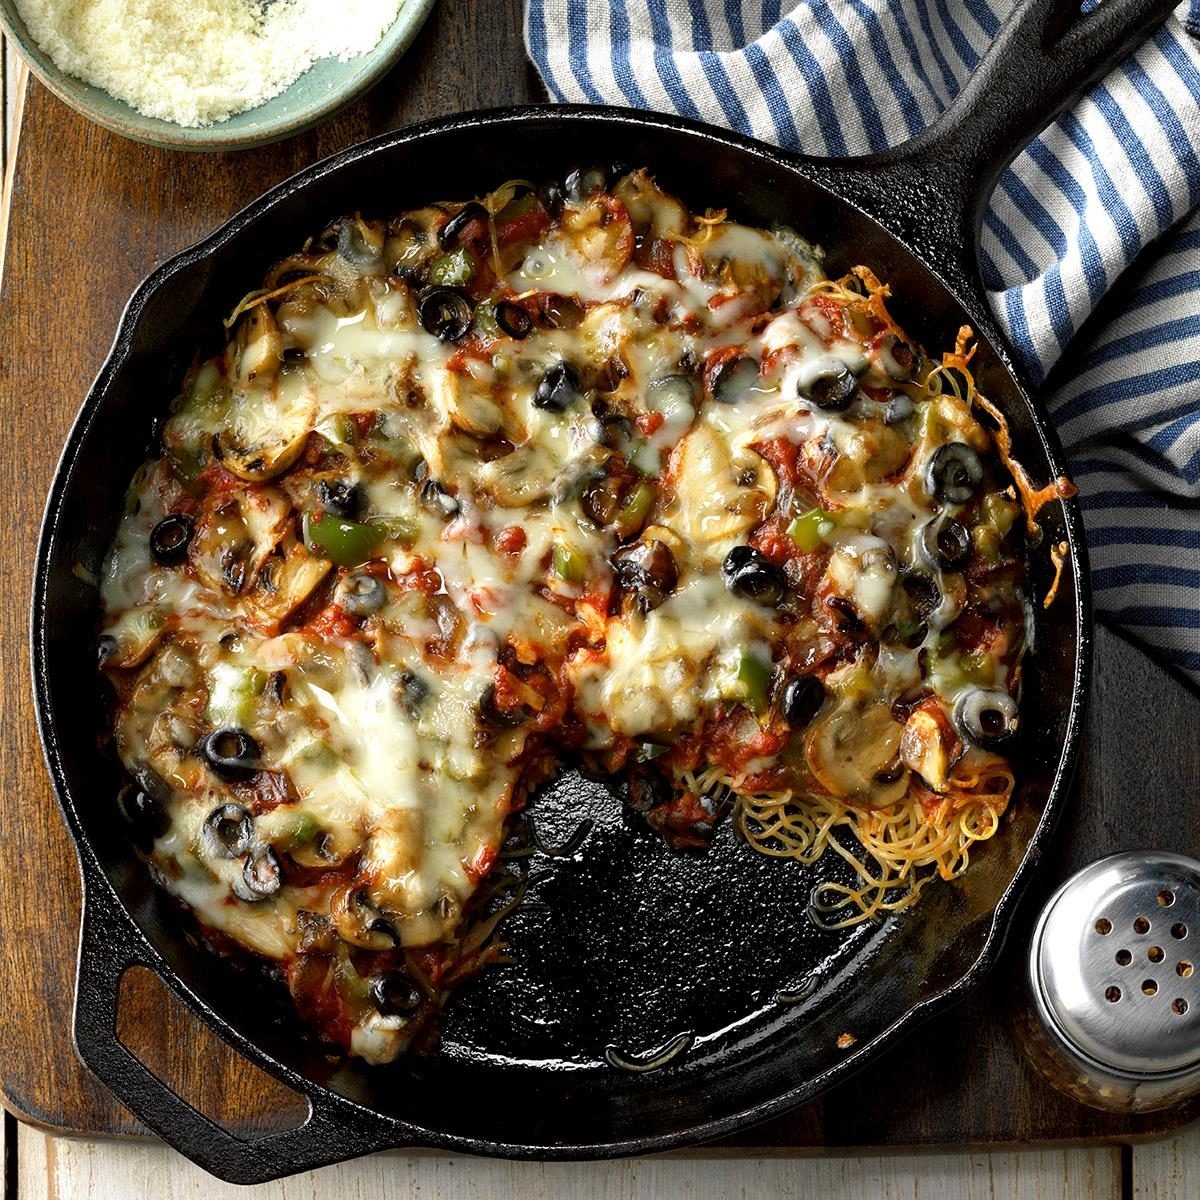 40 Best Cast Iron Skillet Recipes — Easy Cast Iron Skillet Meals